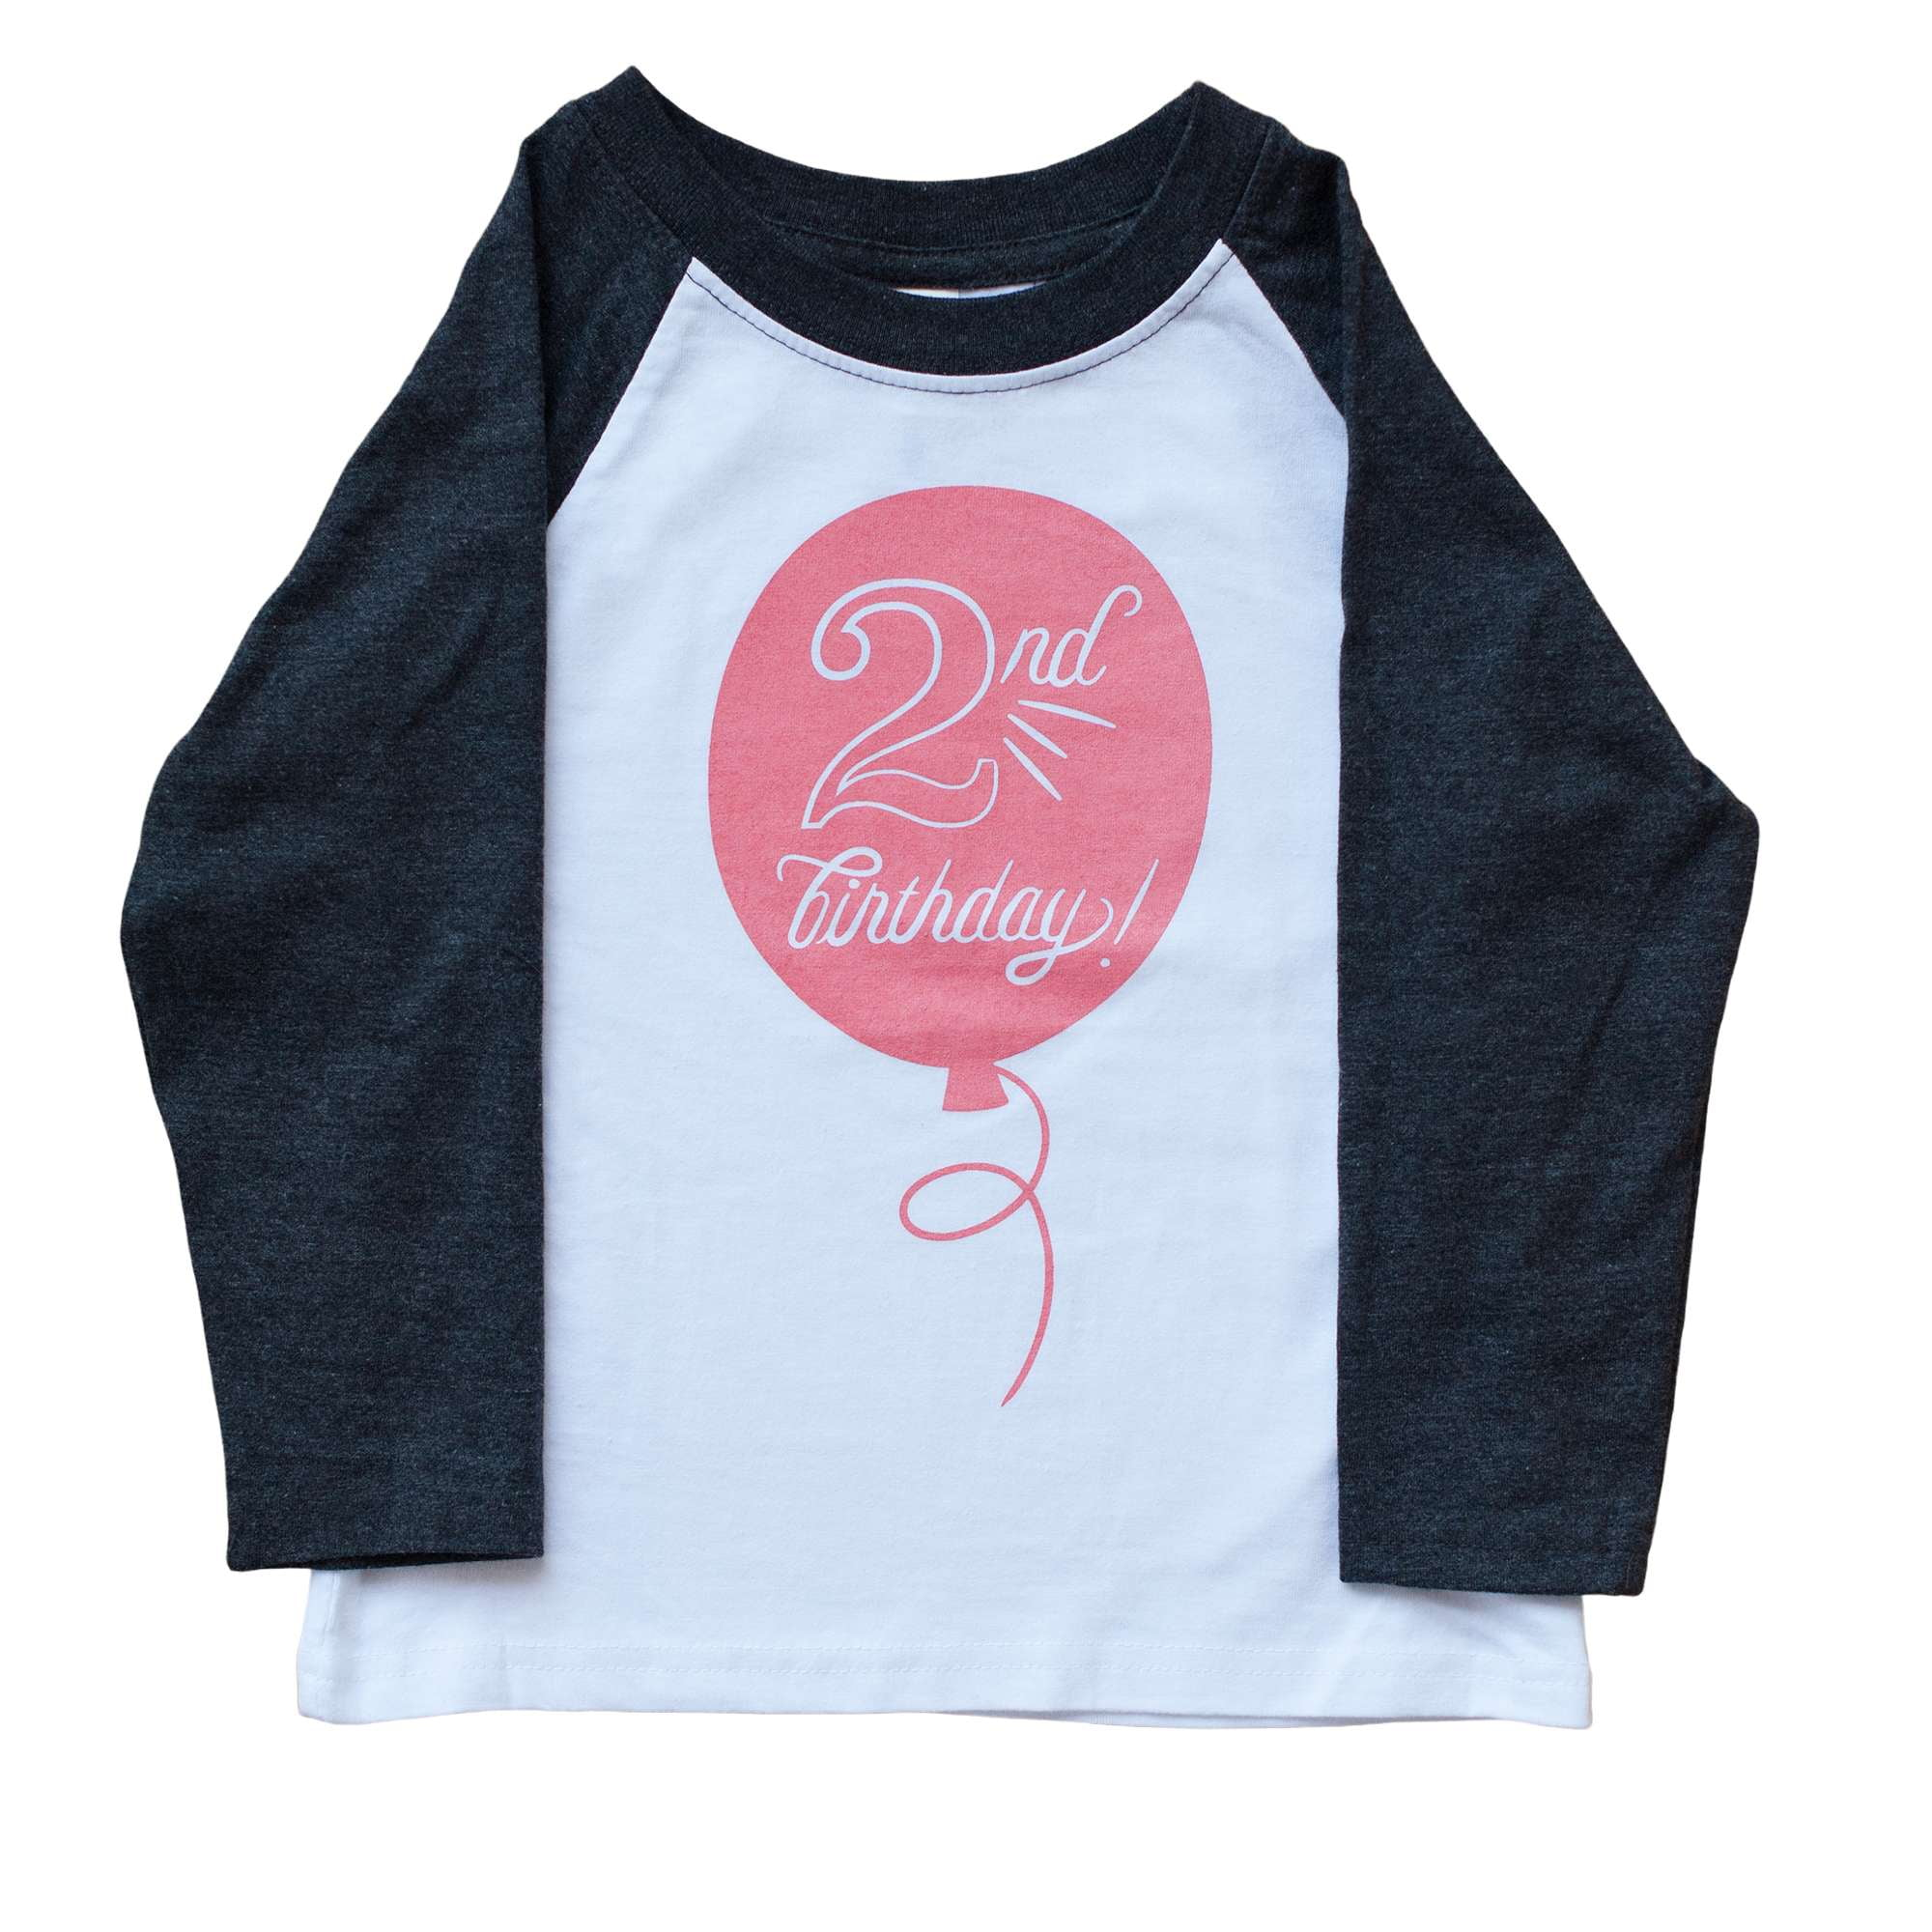 Second Birthday in Coral Raglan Tee - Sweetpea and Co.